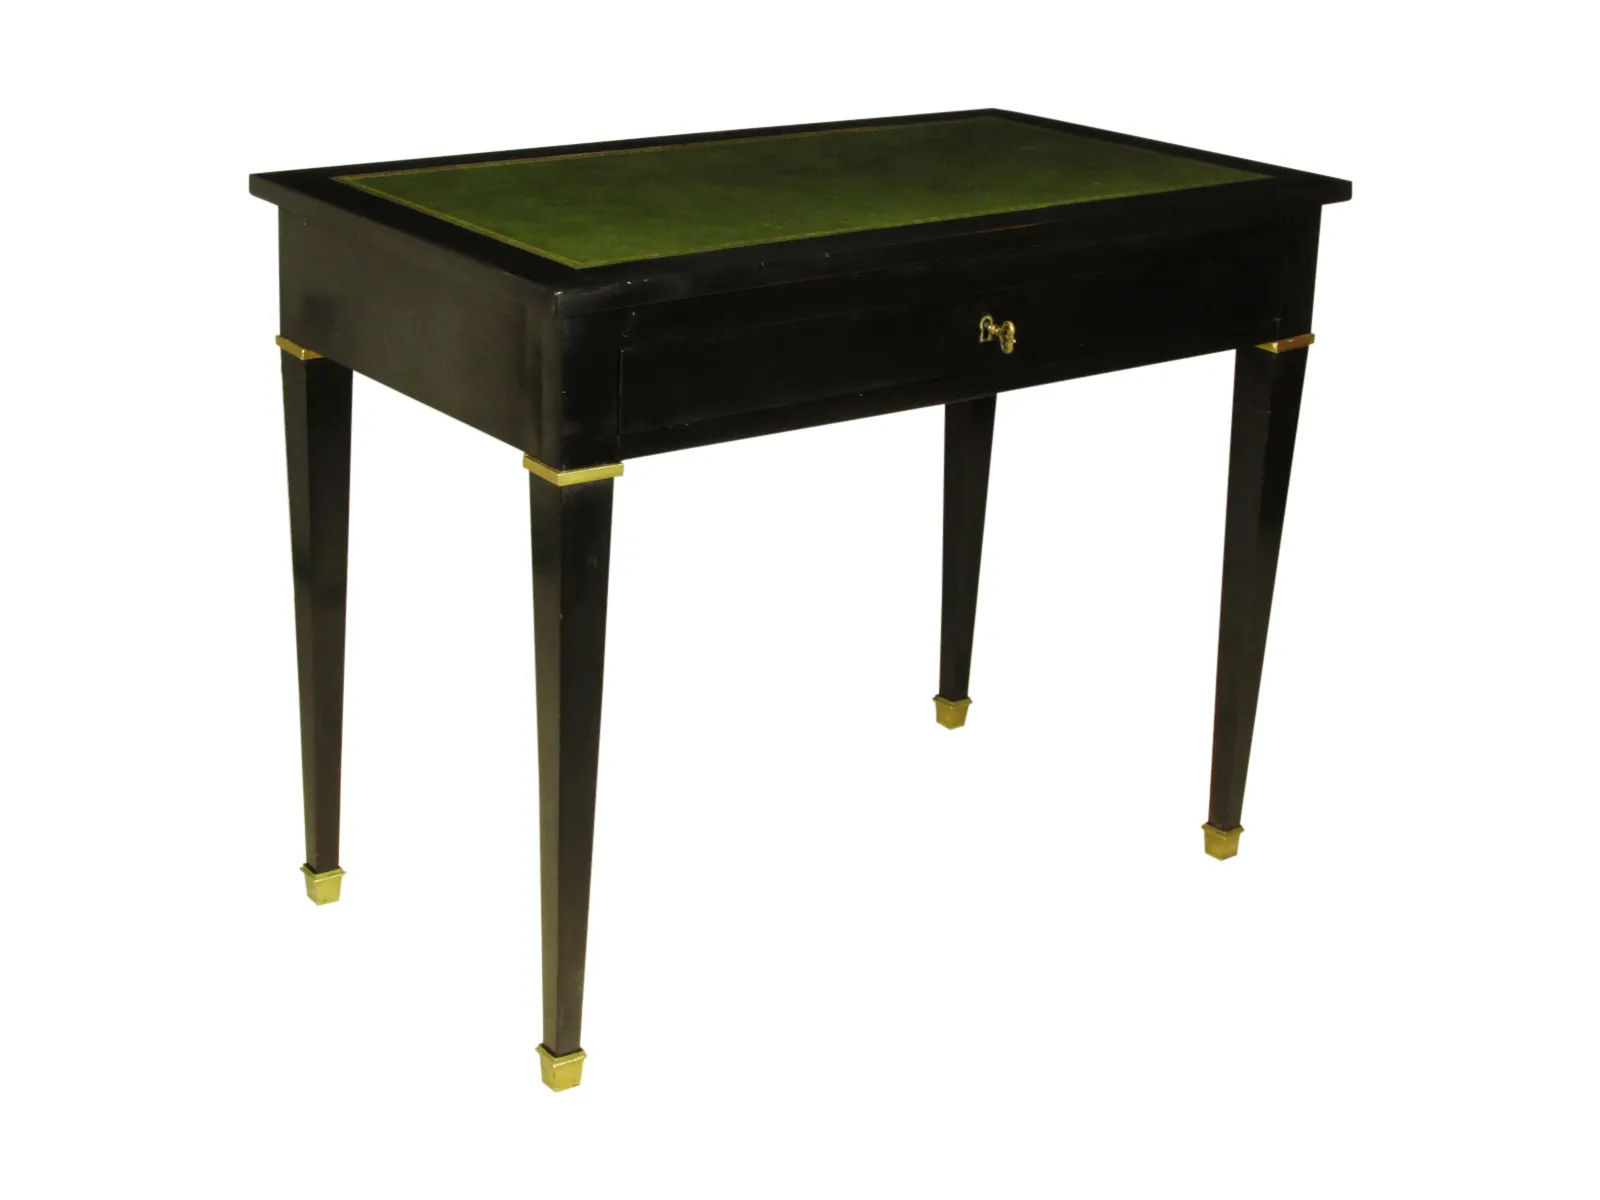 19th-C. Black Lacquer Writing Table - The Barn at 17 Antiques